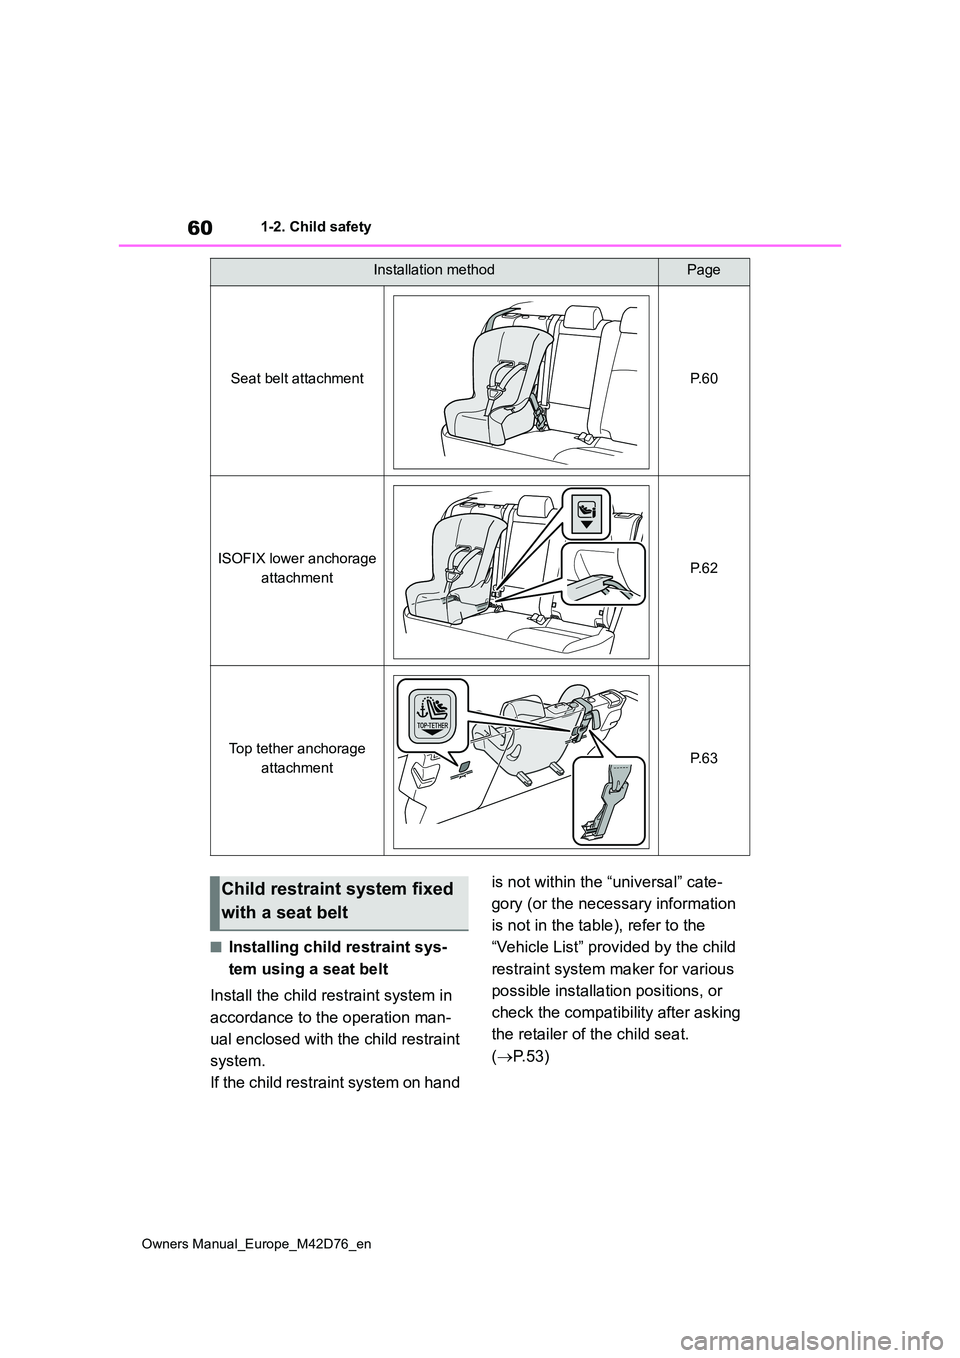 TOYOTA BZ4X 2022   (in English) Owners Manual 60
Owners Manual_Europe_M42D76_en
1-2. Child safety
■Installing child restraint sys- 
tem using a seat belt 
Install the child restraint system in  
accordance to the operation man- 
ual enclosed wi